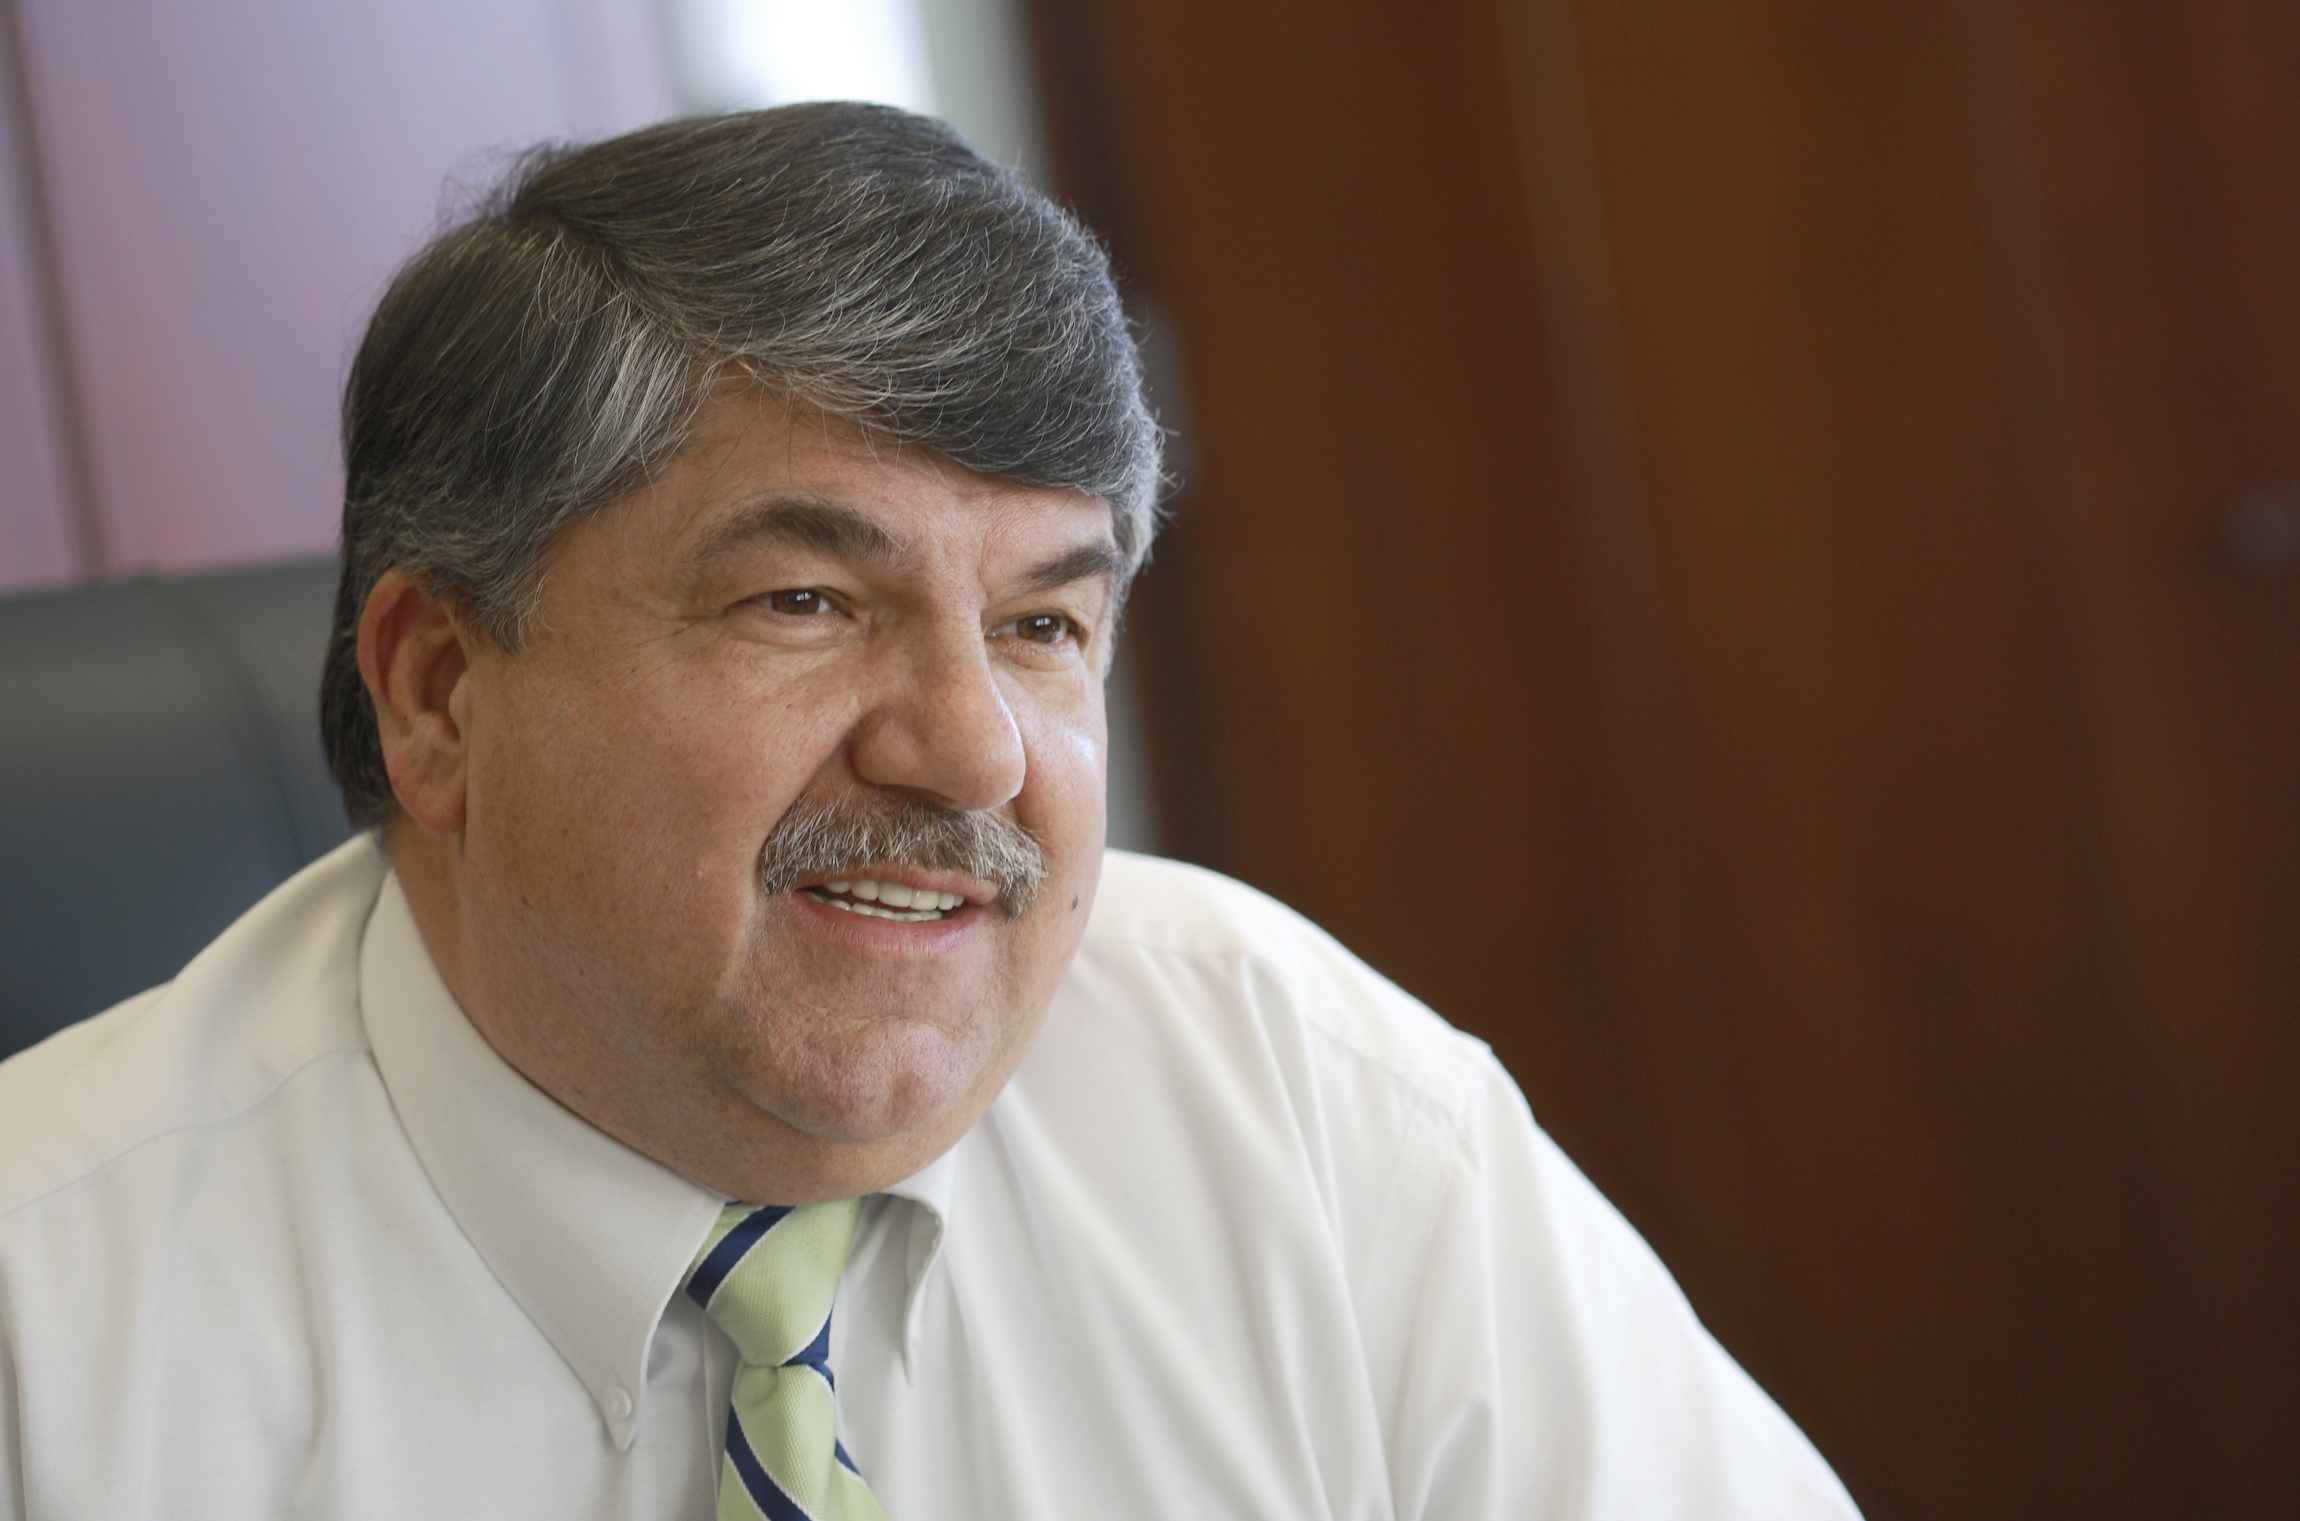 Richard Trumka in his office at the AFL-CIO headquarters in March 2010 in Washington. (CNS/Nancy Wiechec) 